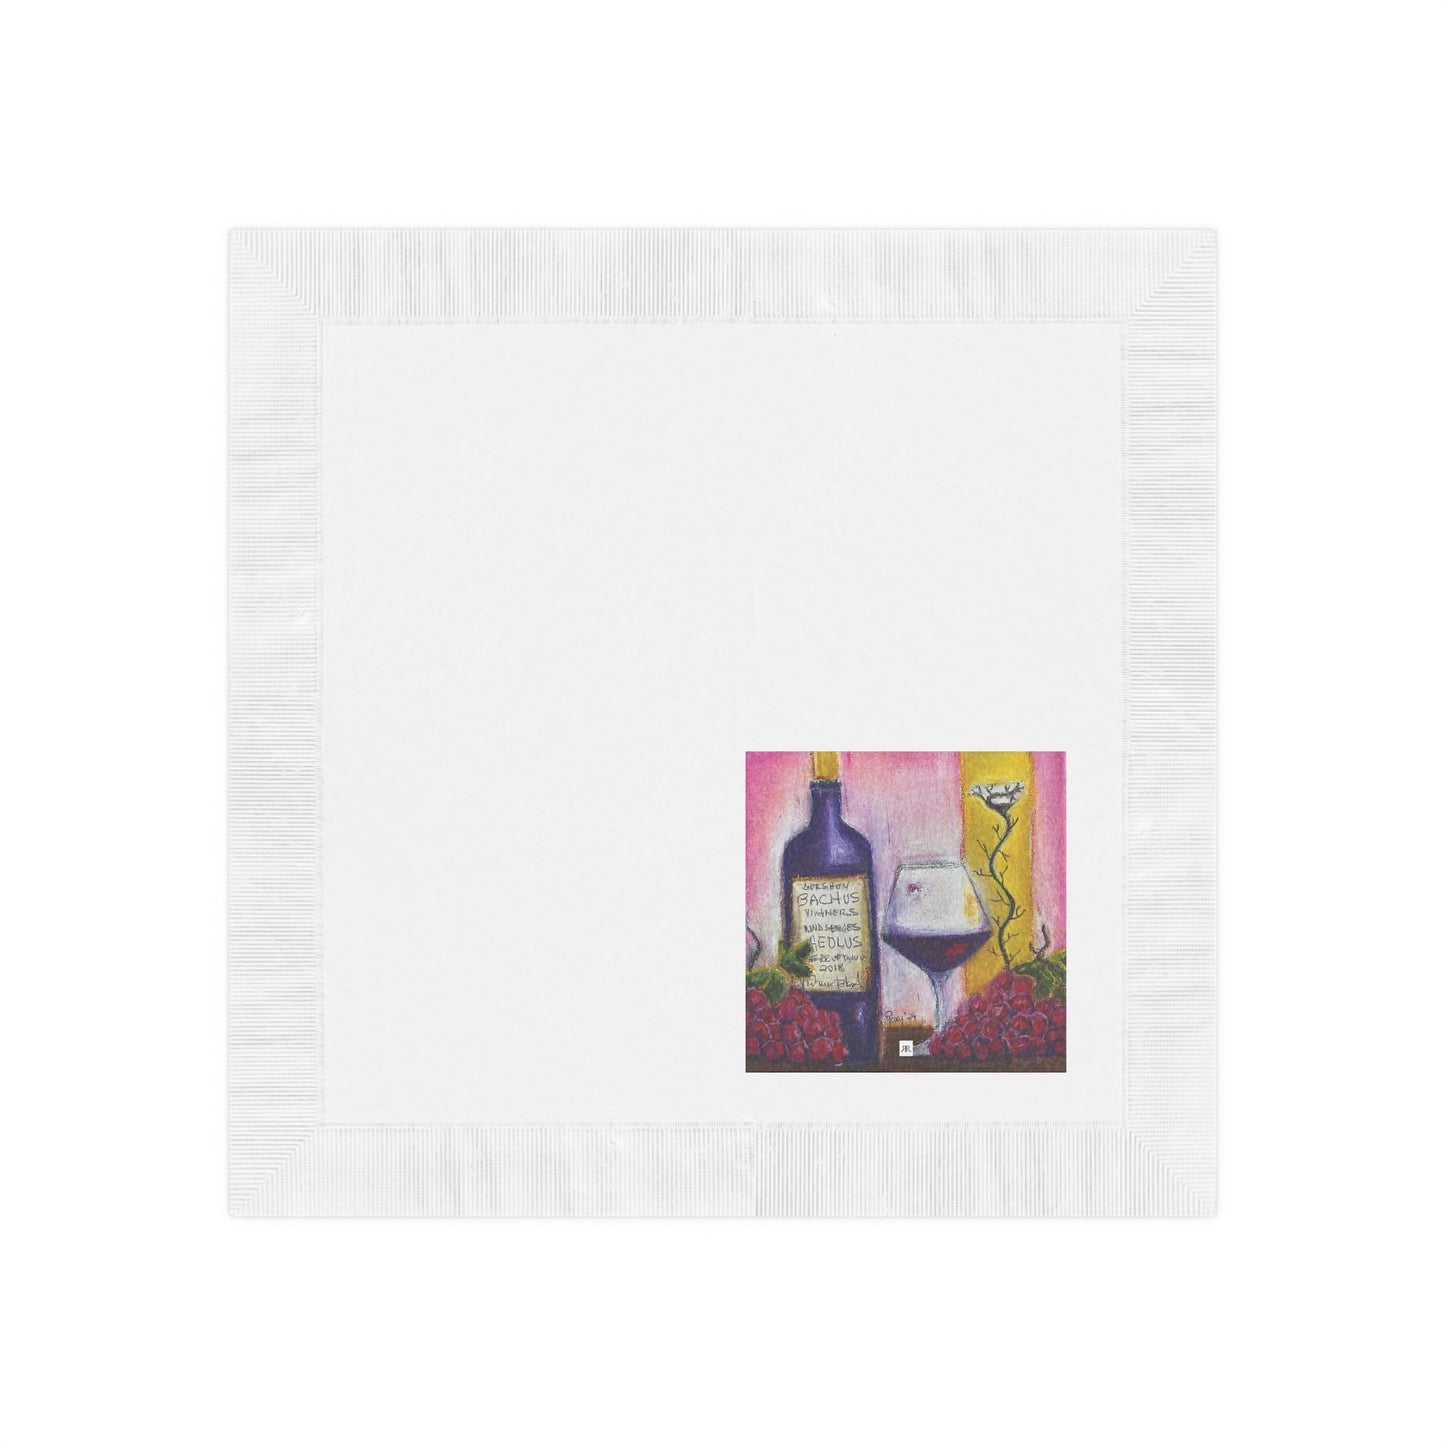 Aeolus-GBV Wine Bottle and Clique Glass-White Coined Napkins